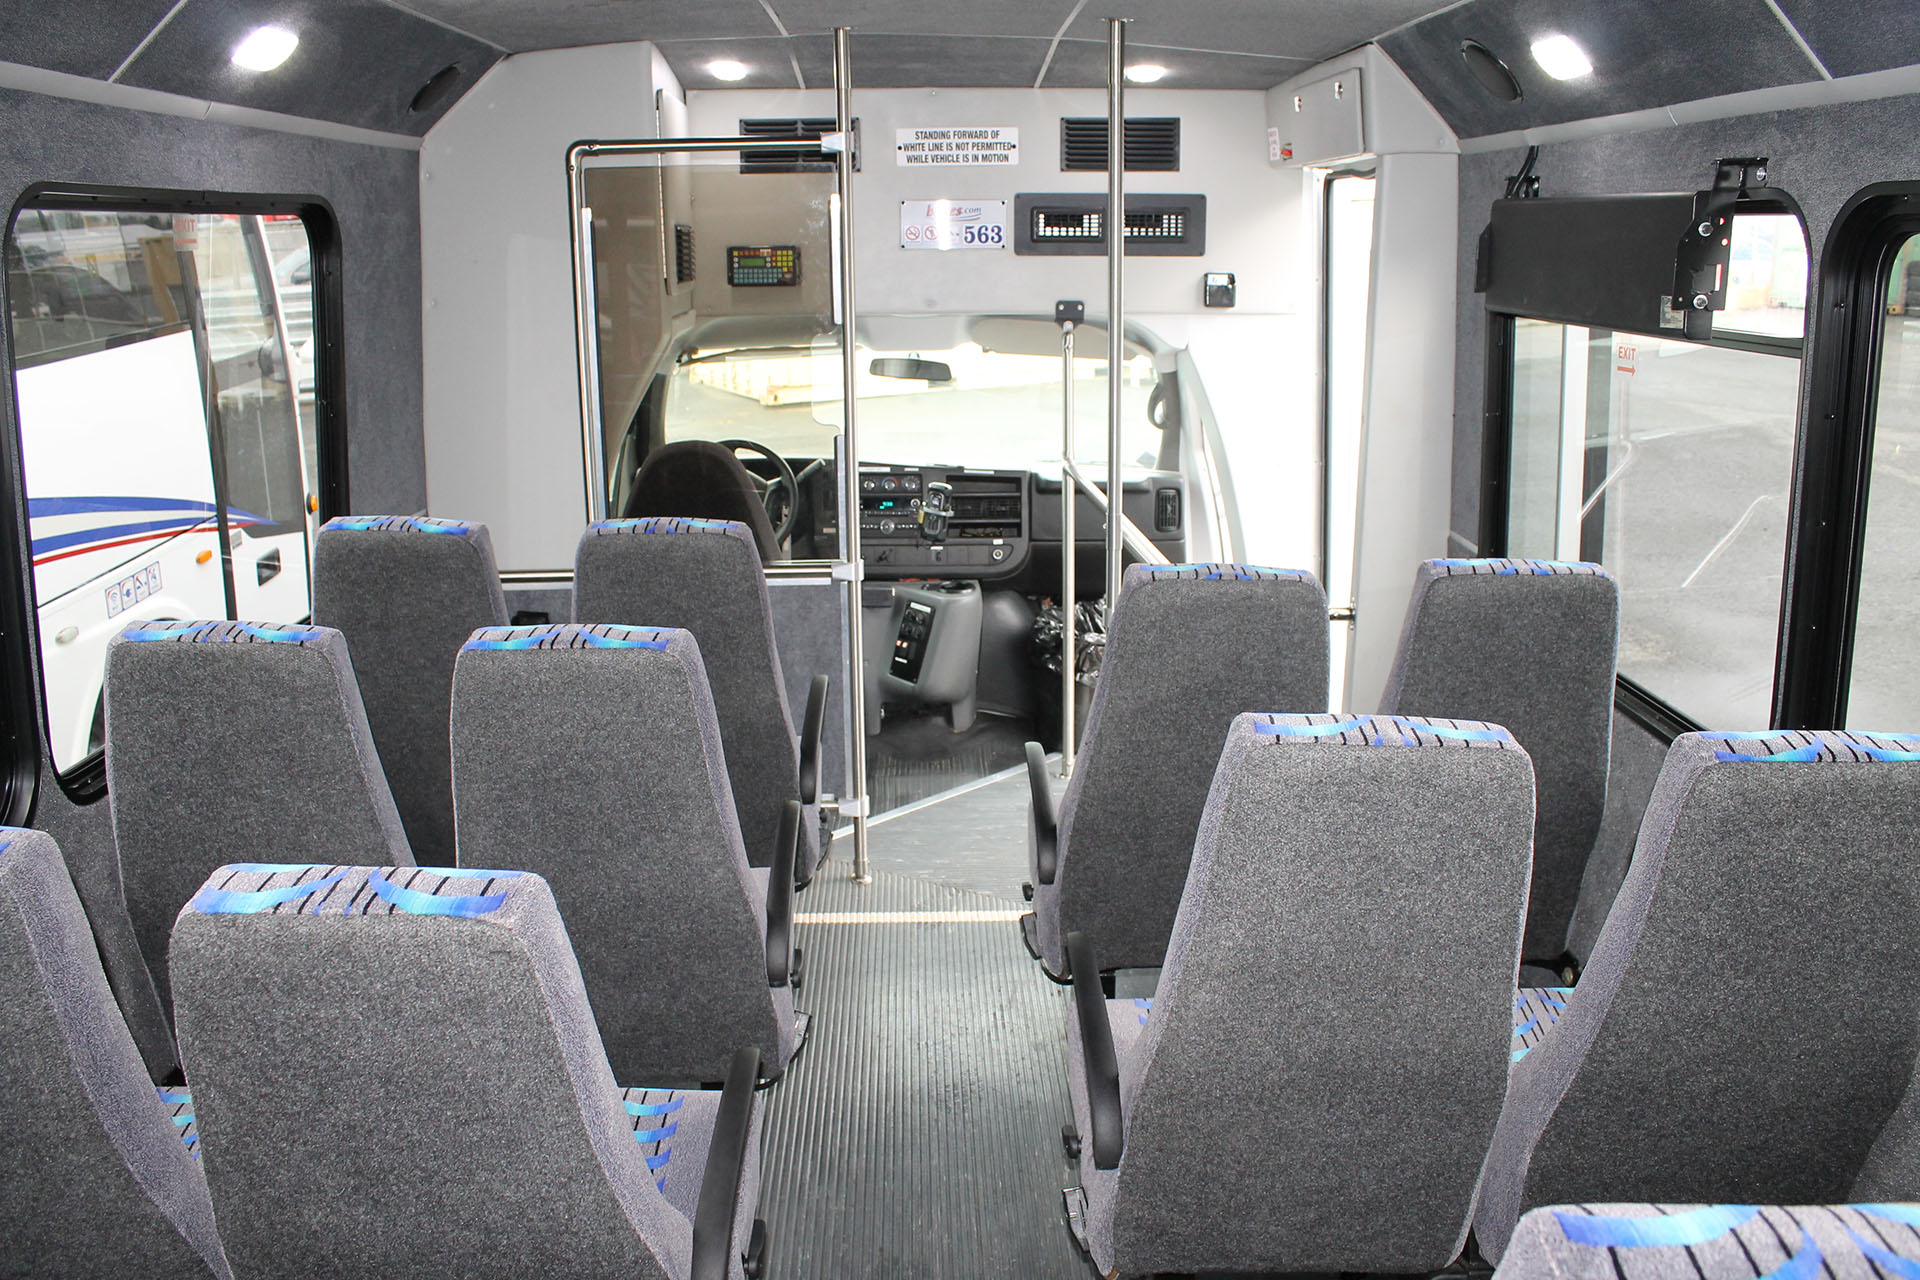 View of front of passenger bus